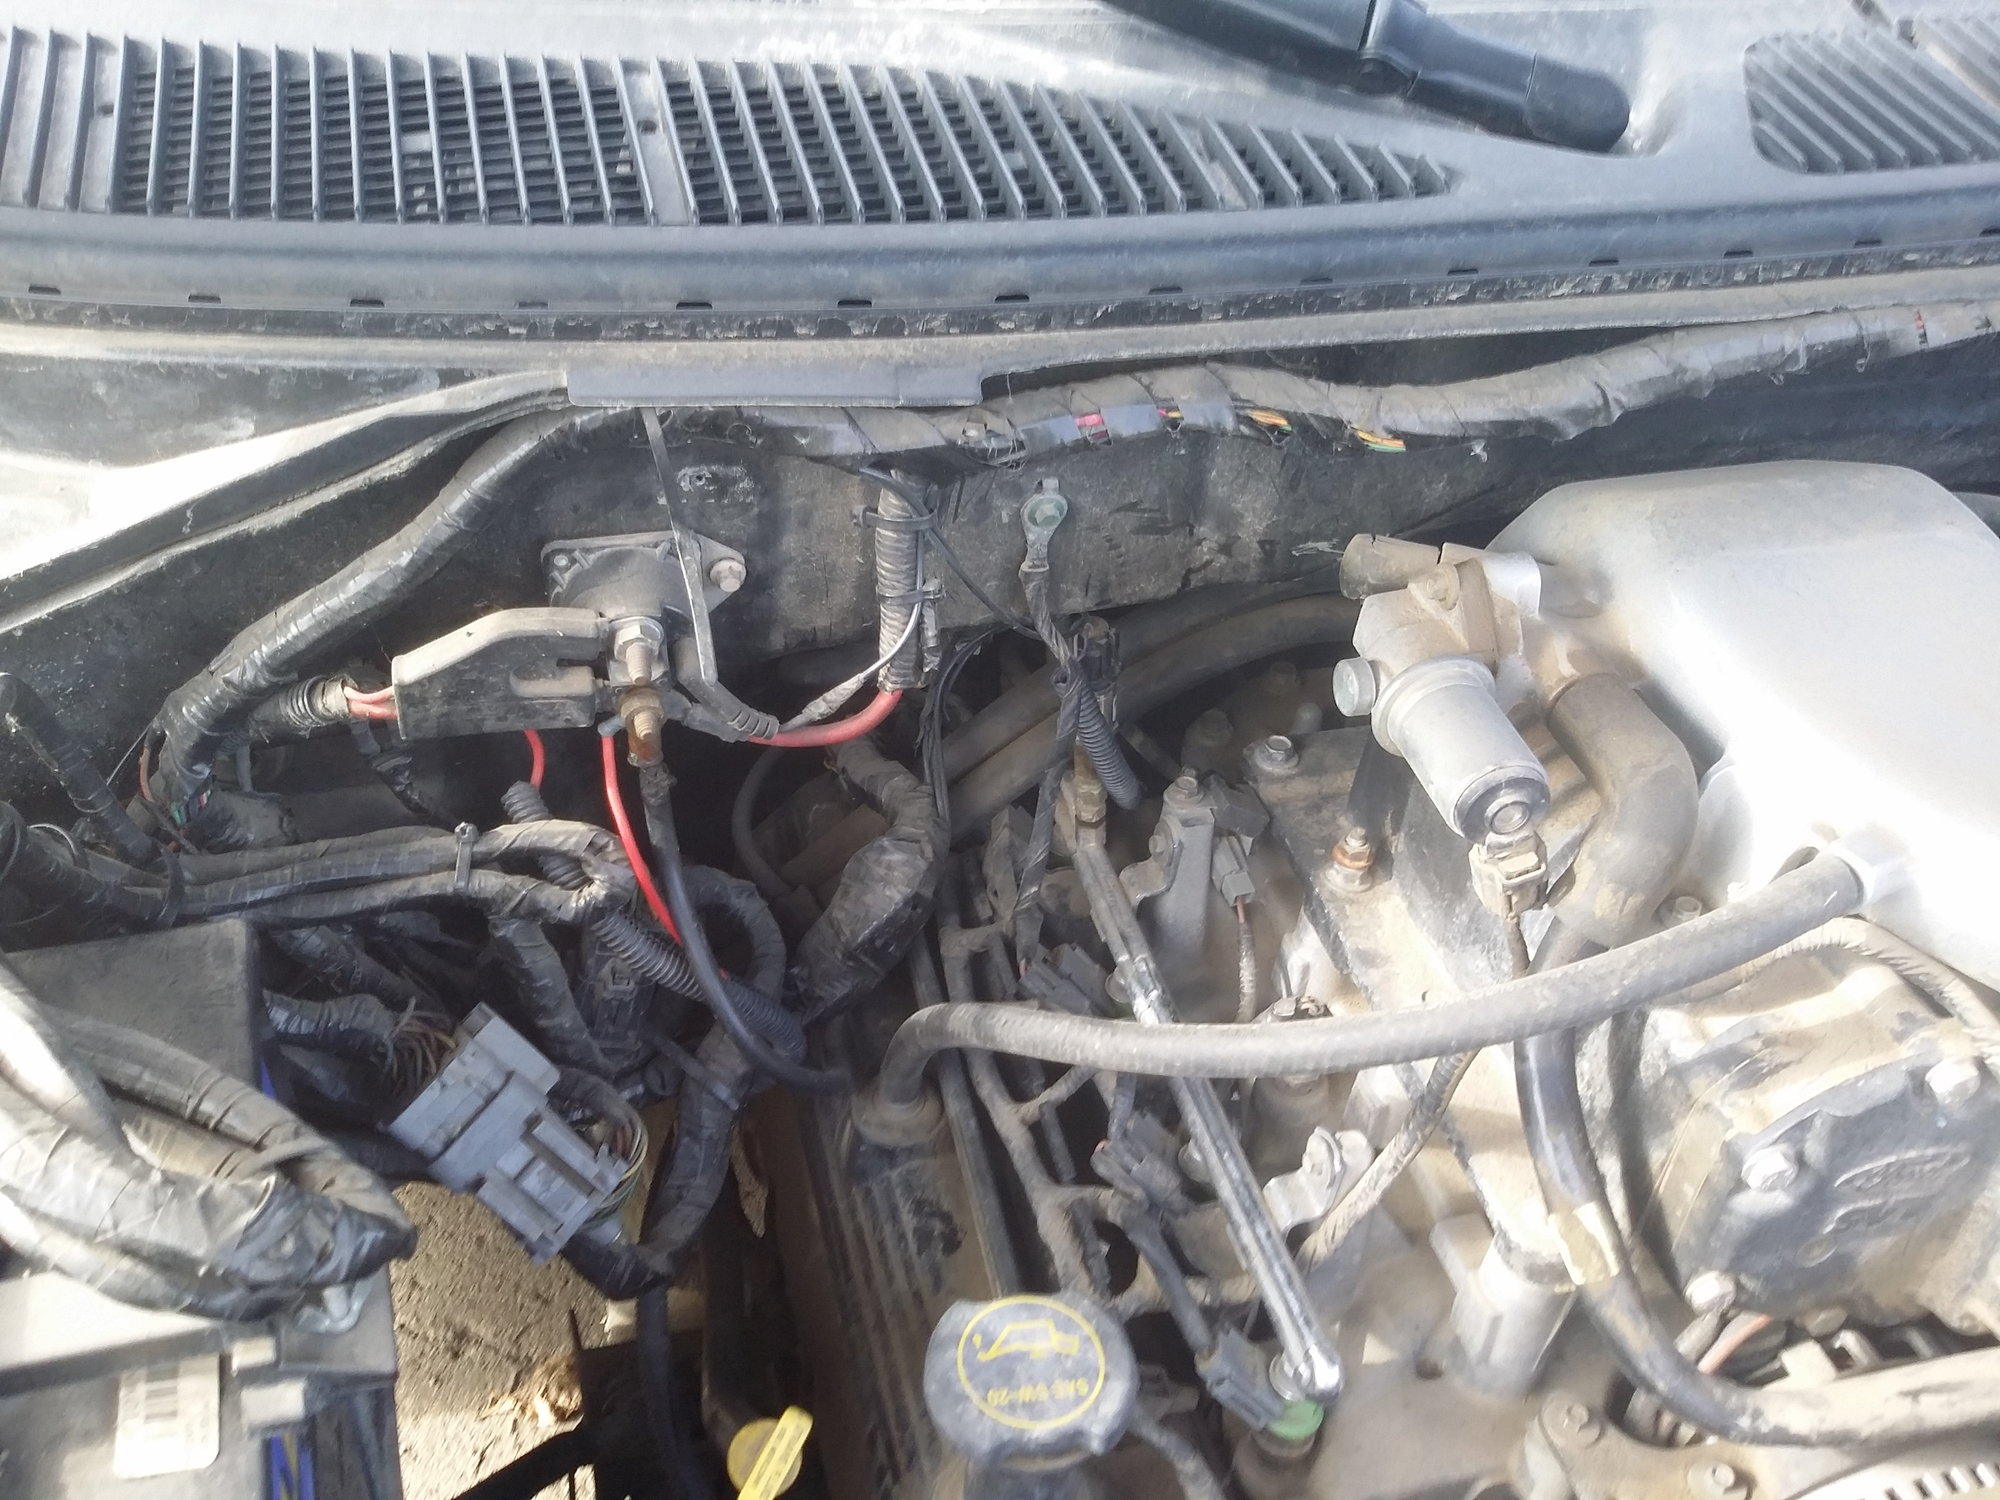 Want to Buy Full wiring harness - Ford F150 Forum - Community of Ford